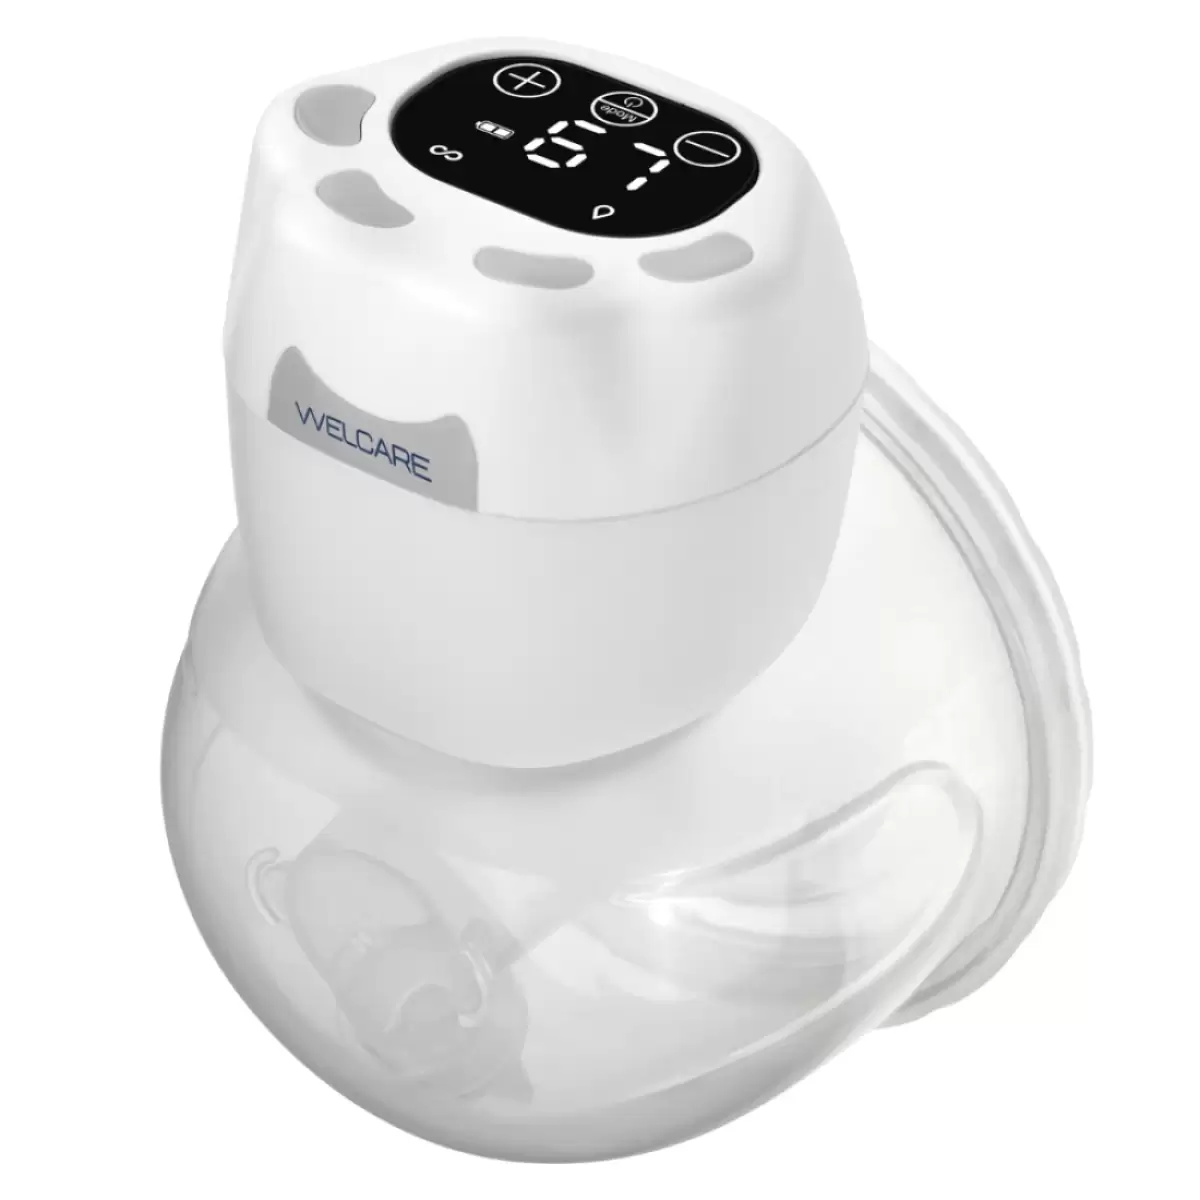  Goldeep Wearable Breastfeeding– Hands Free Portable,3 Modes &  12 Levels Electric Breast Pump – LCD Screen, No Leakage, Low Noise, 27mm  Default/24mm Flange : Baby